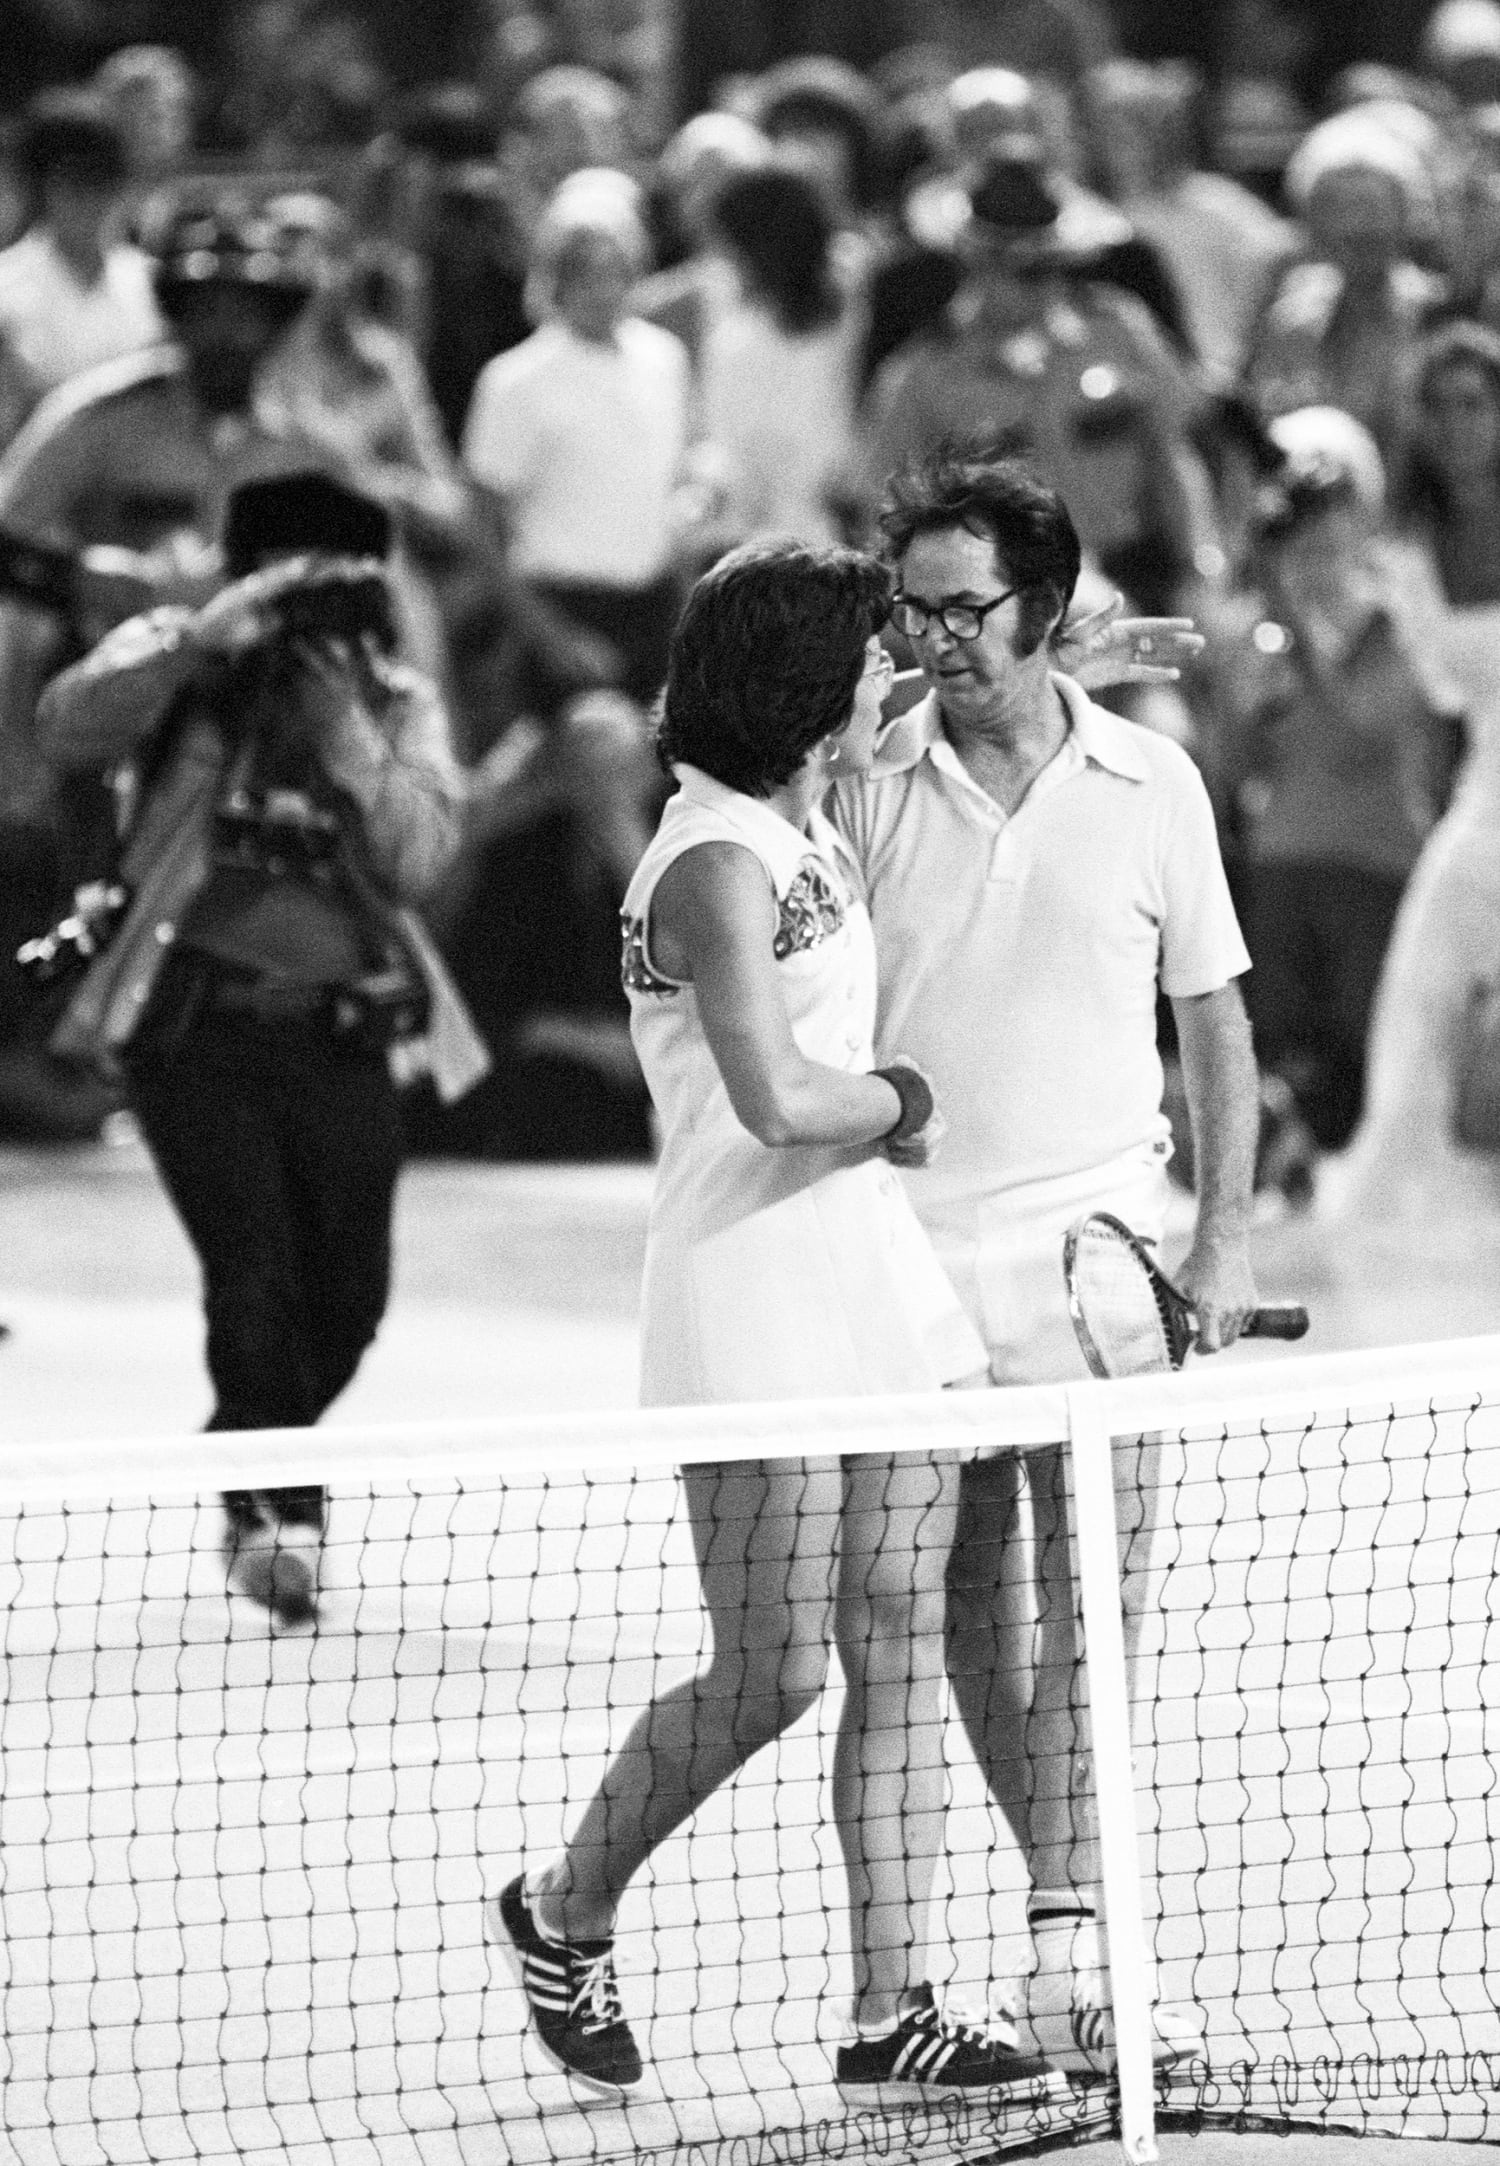 How To Watch The Real Battle Of The Sexes Match & See Billie Jean